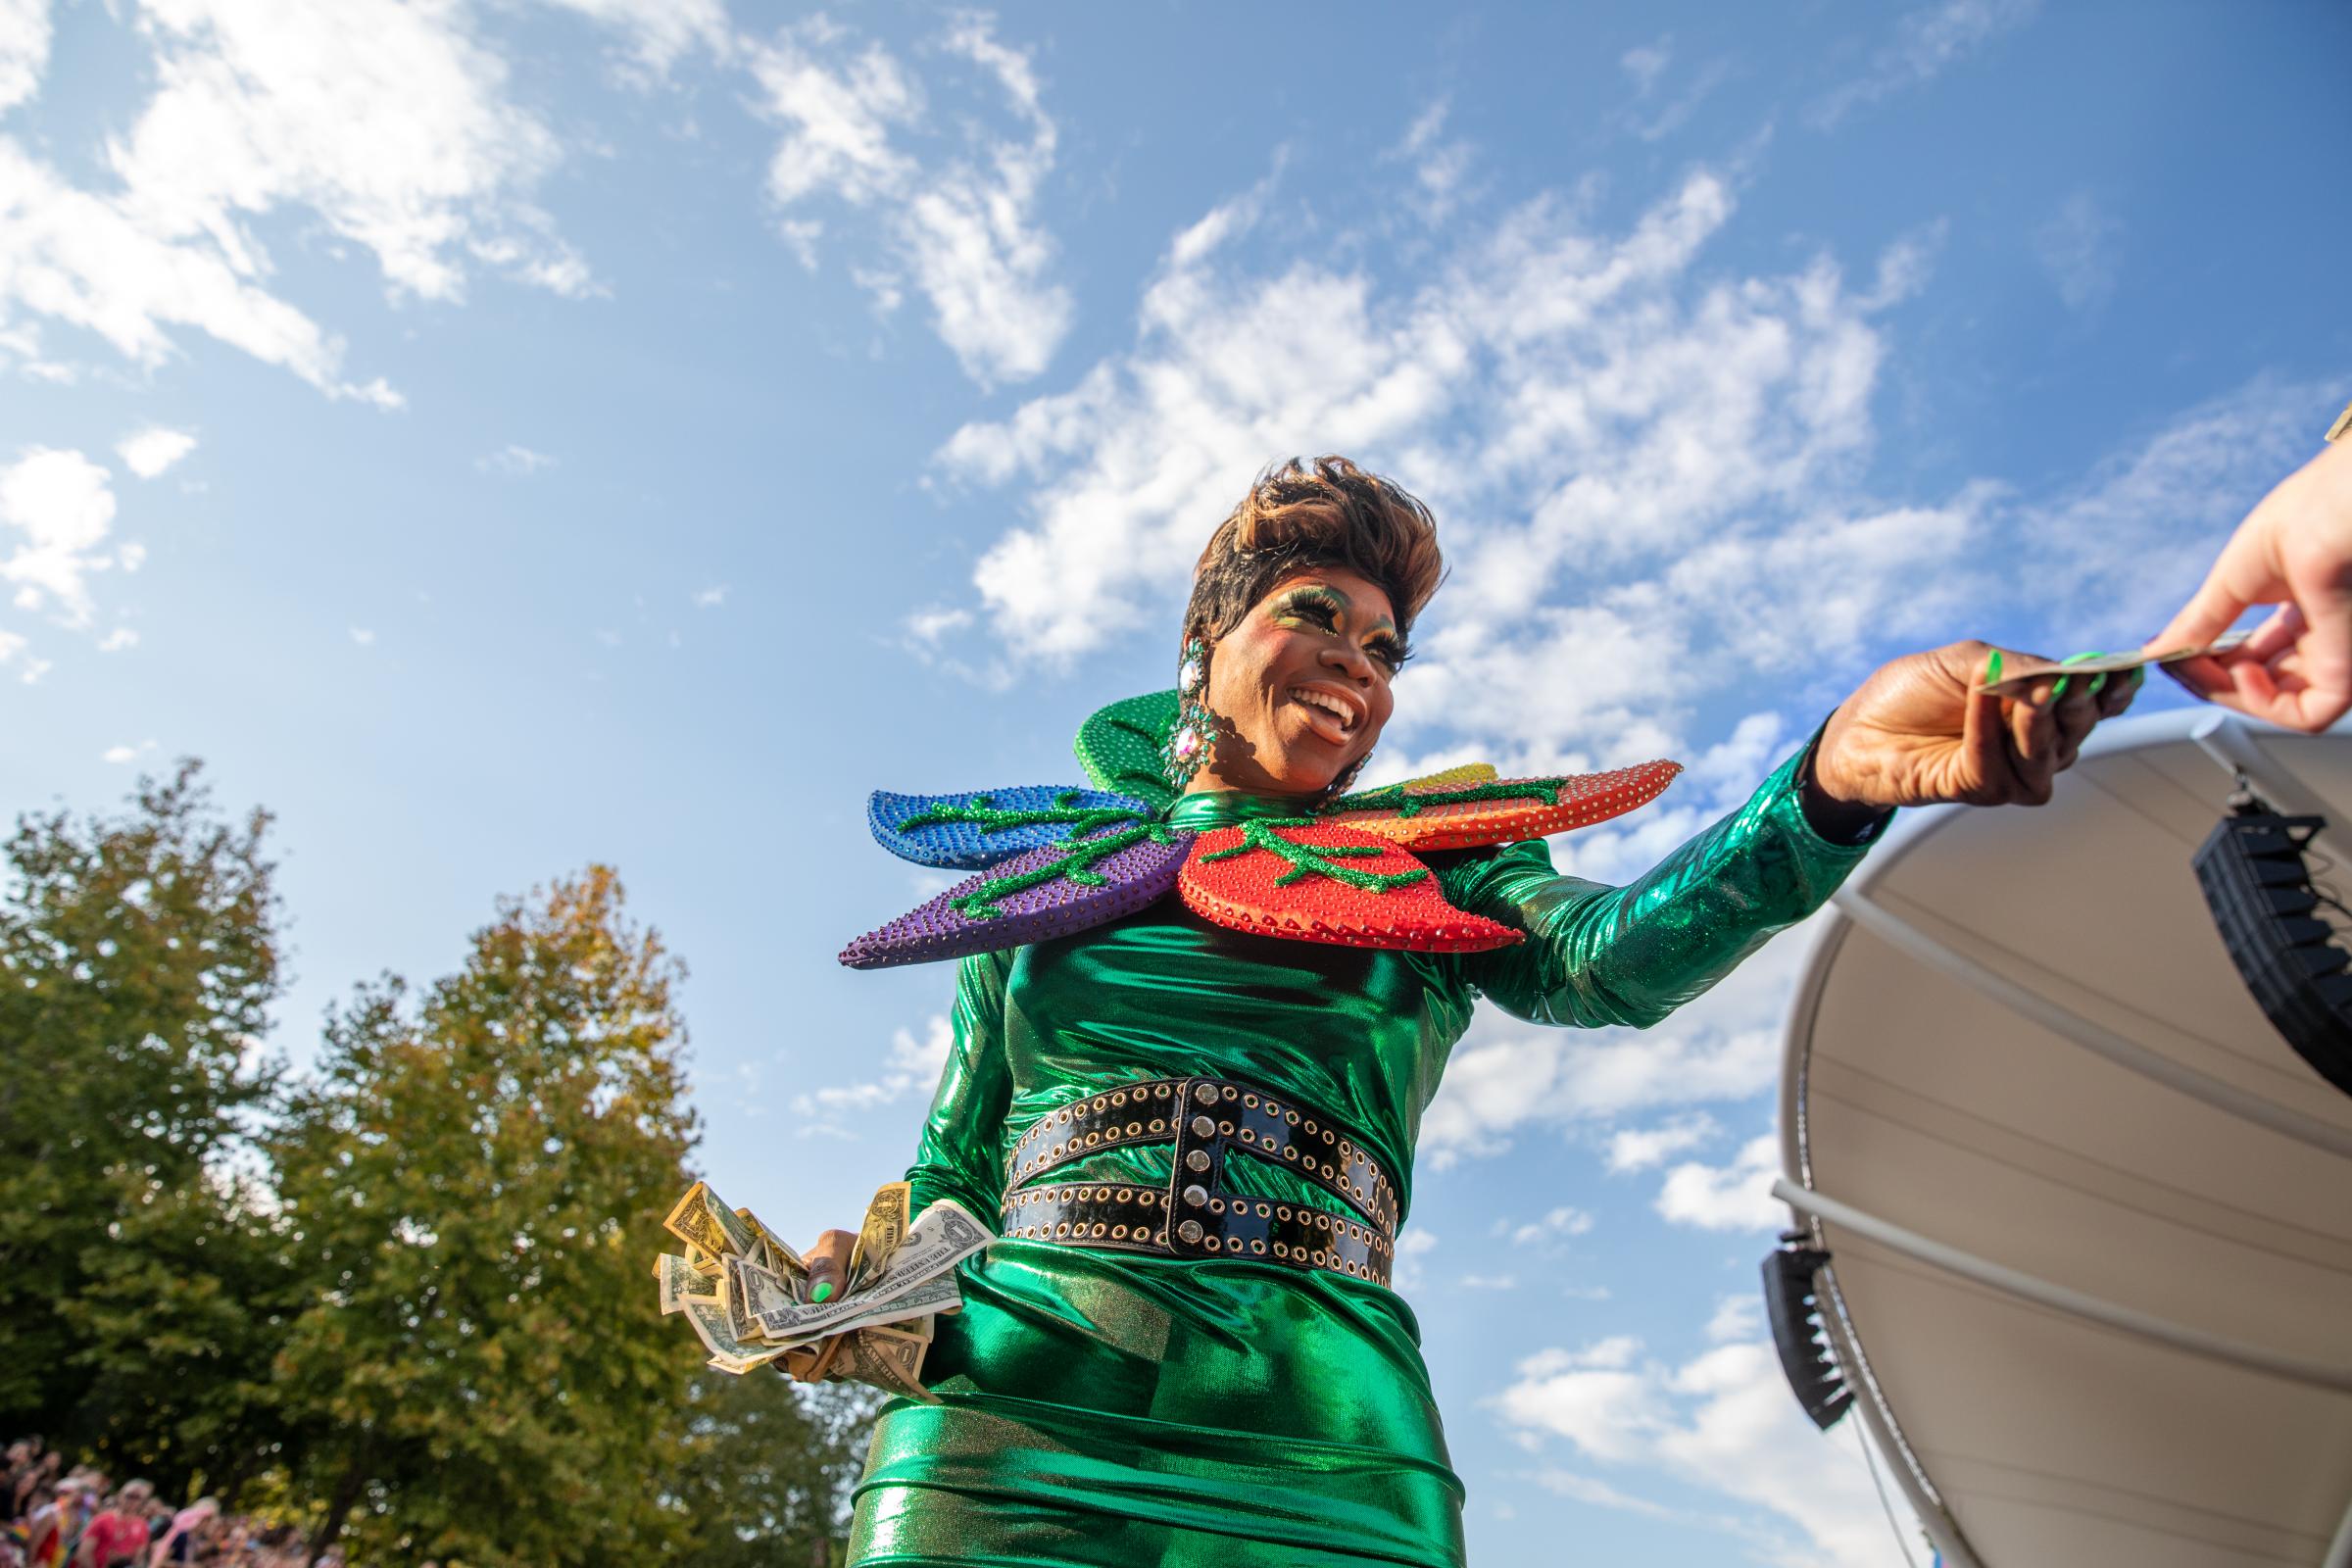 Blue Ridge Pride Festival 2022 - Drag queen performers collected tips from excited attendees.